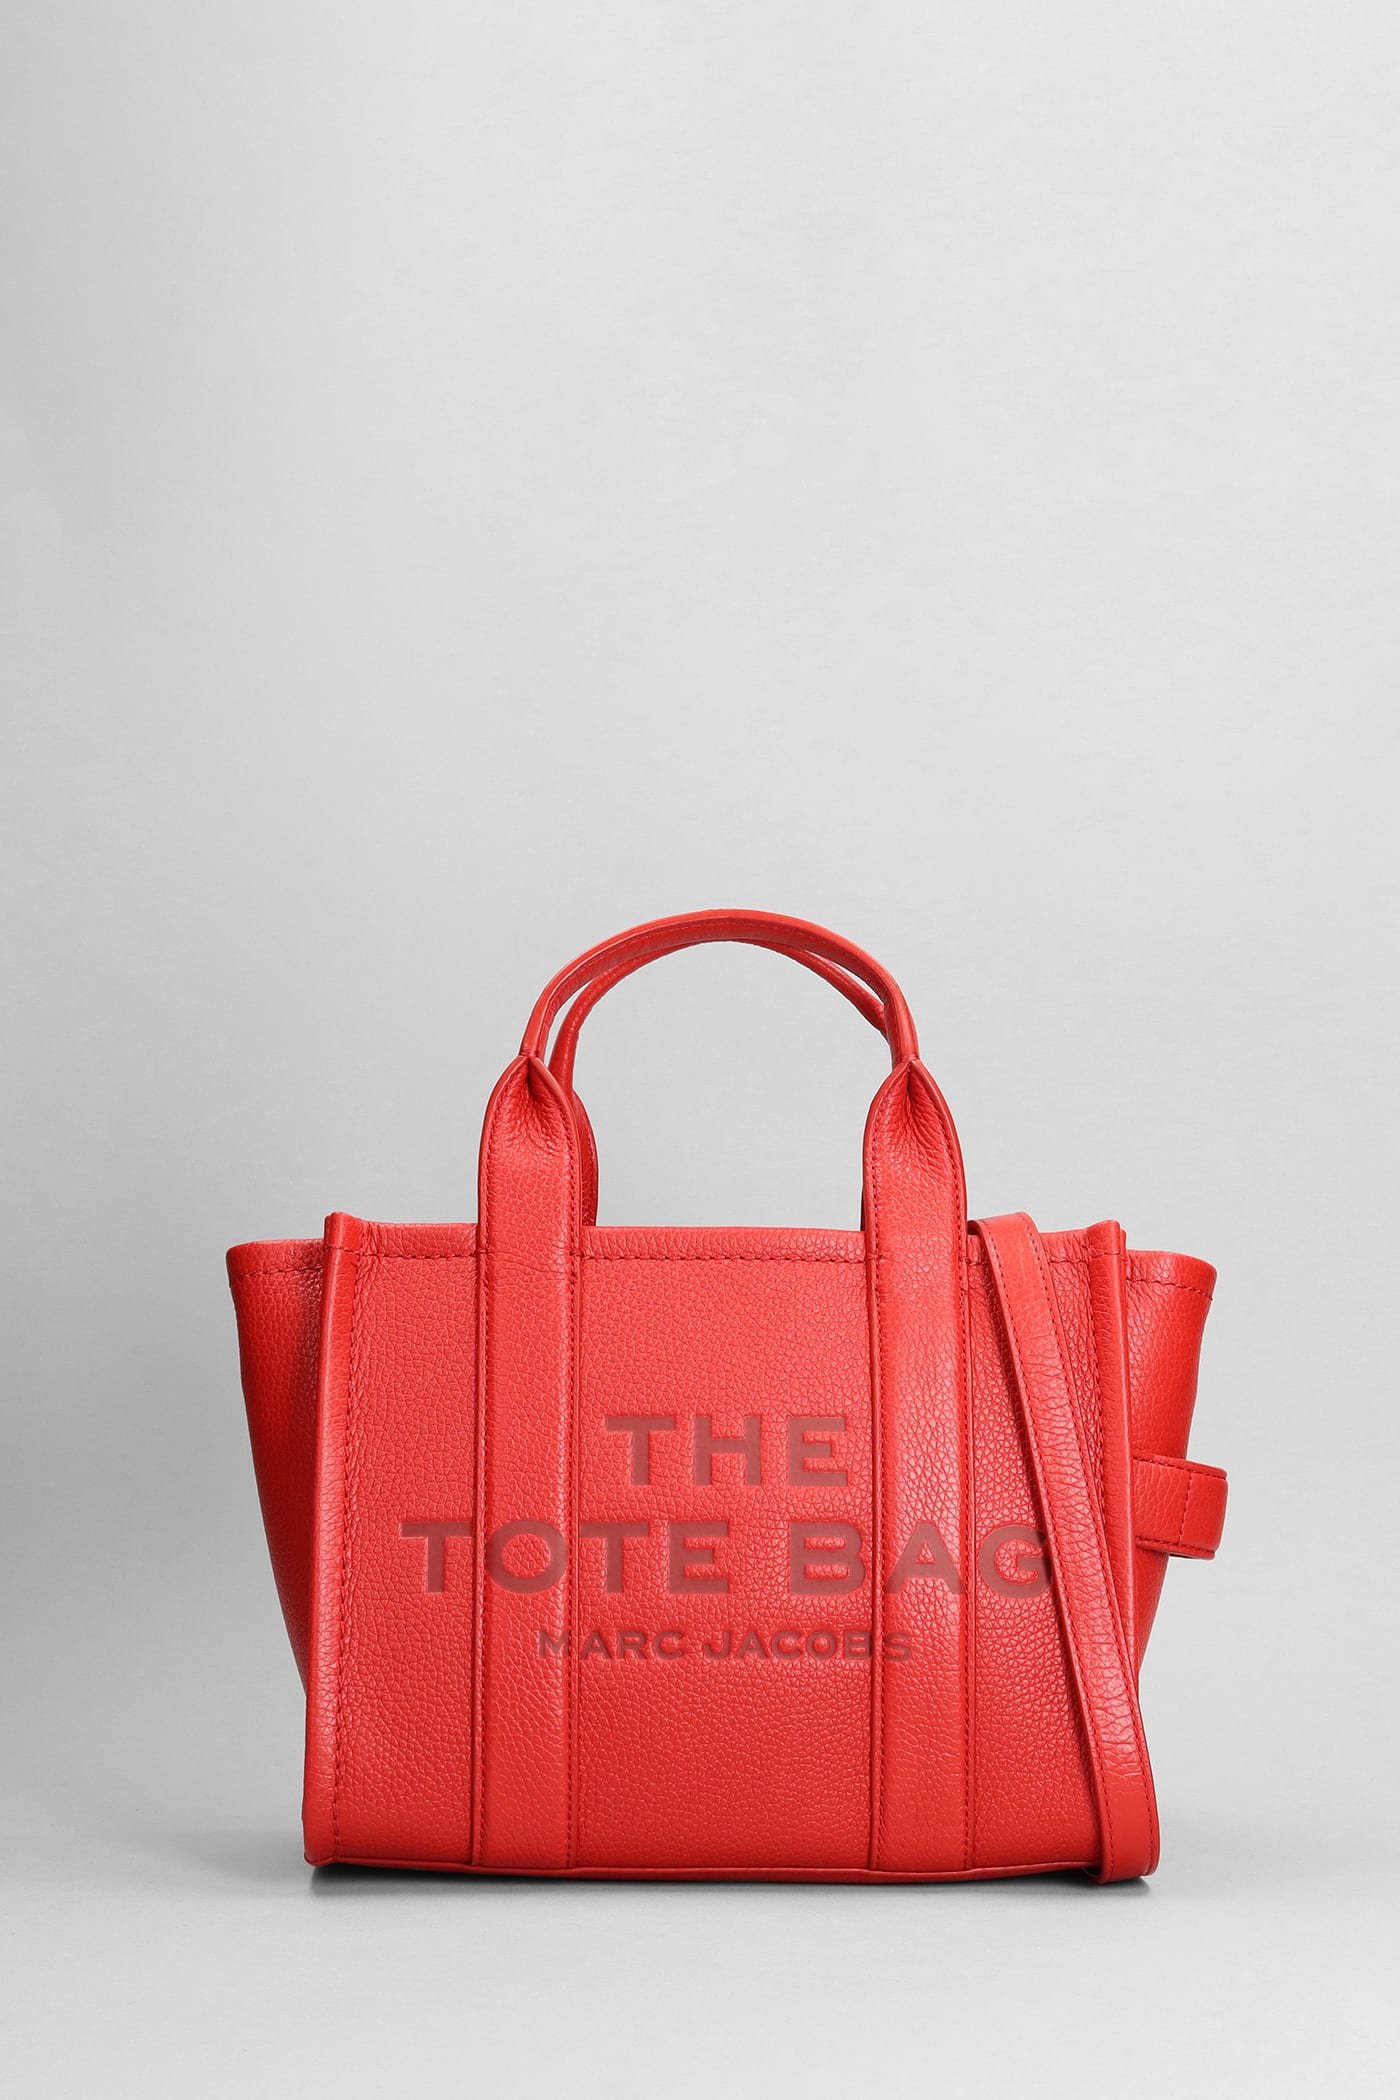 Marc Jacobs The Mini Tote Tote In Red Leather